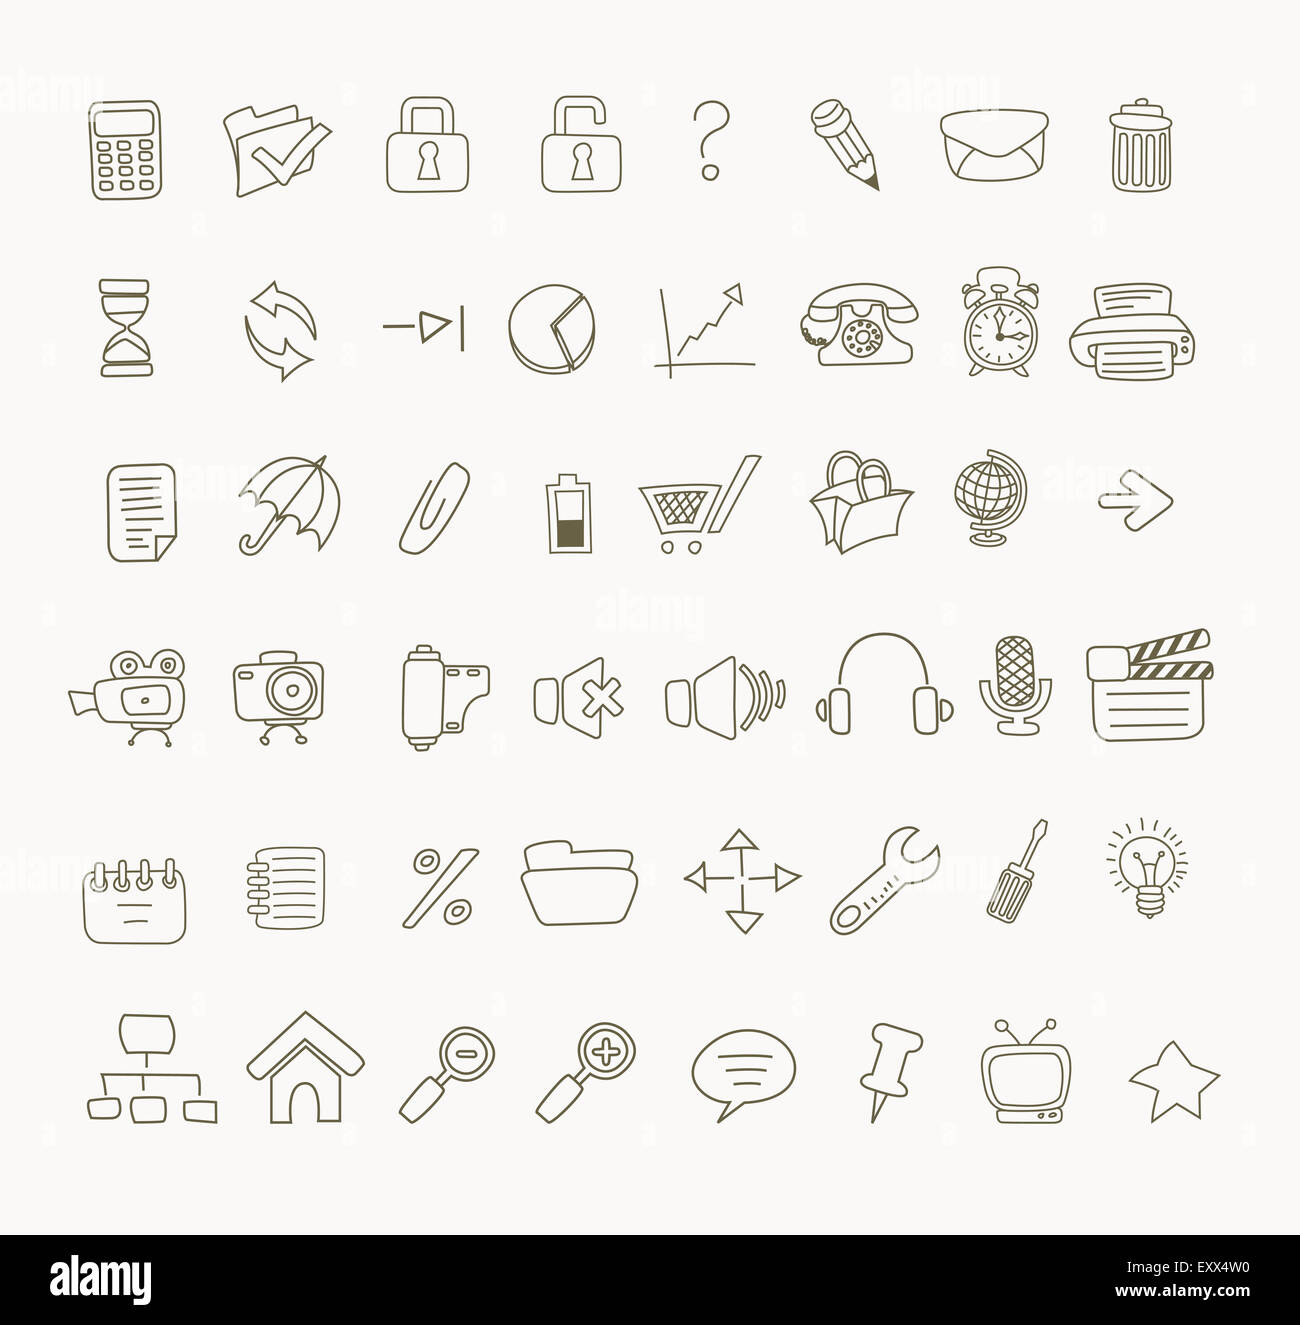 Different media and office icons- line drawing Stock Photo